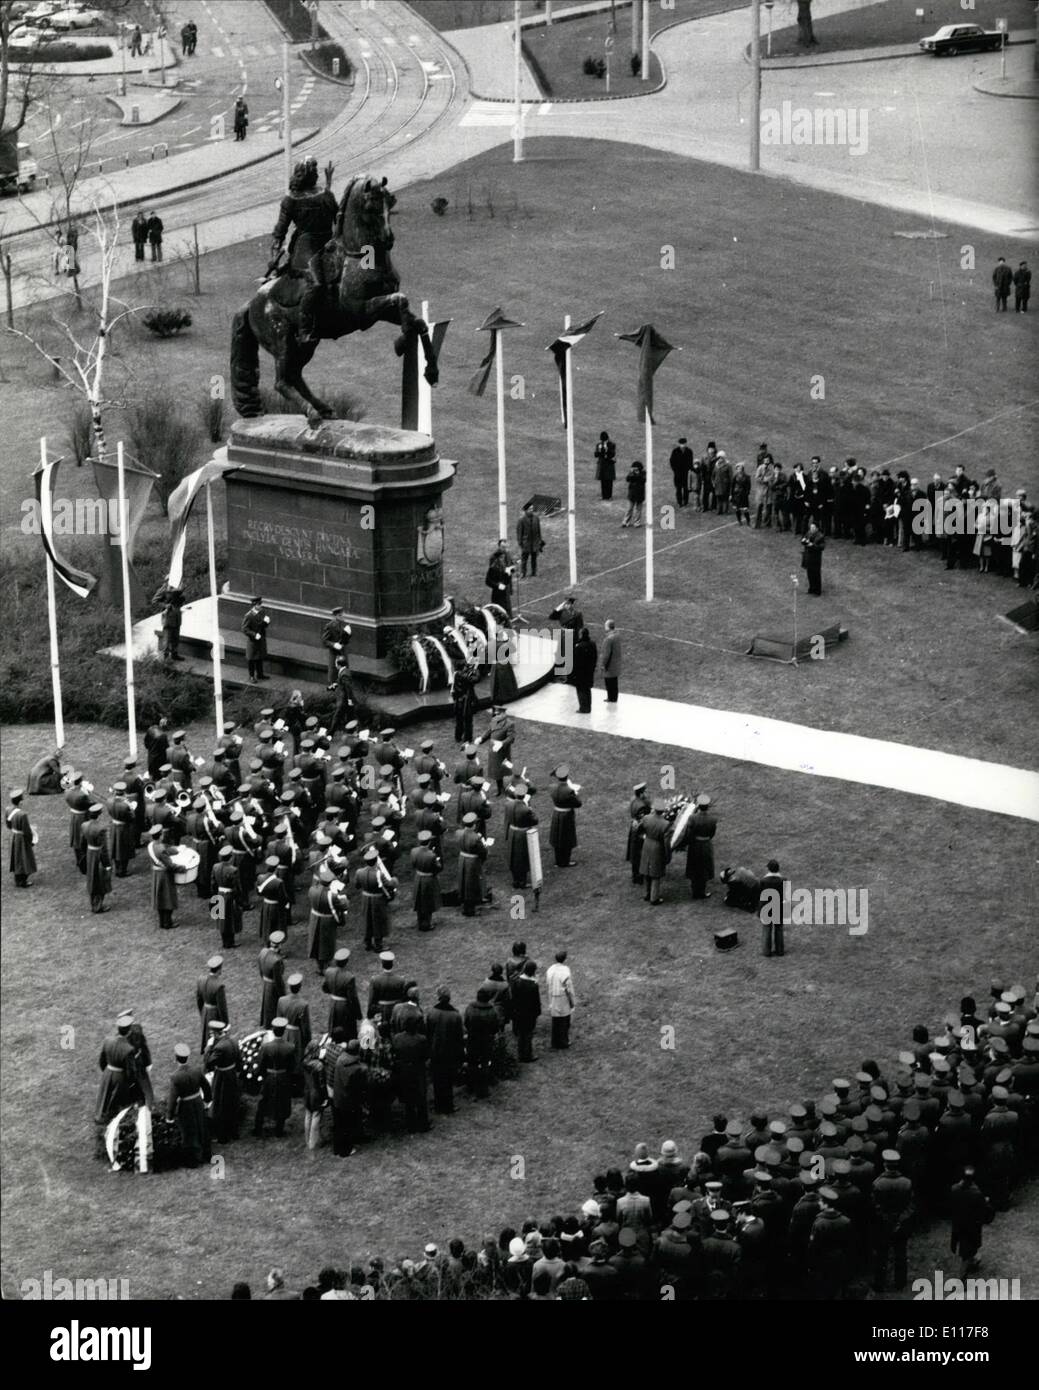 Mar. 03, 1976 - Wreath-laying ceremony at the statue of Ferenc Rakoczi II: Festive programme were held all over the country today and yesterday to commemorate the 300th anniversary of the birth of Reigning Prince Ferenc Rakoczi II. He commanded the Hungarian war of independence against Hapsburg rule in the first decades of the 18th century. Members of the Presidential Council. the Hungarian Government and the representatives of the Patriotic People's Front laid wreathes at the statue of Rakoczi on the Lajos Kossuth Square. Stock Photo